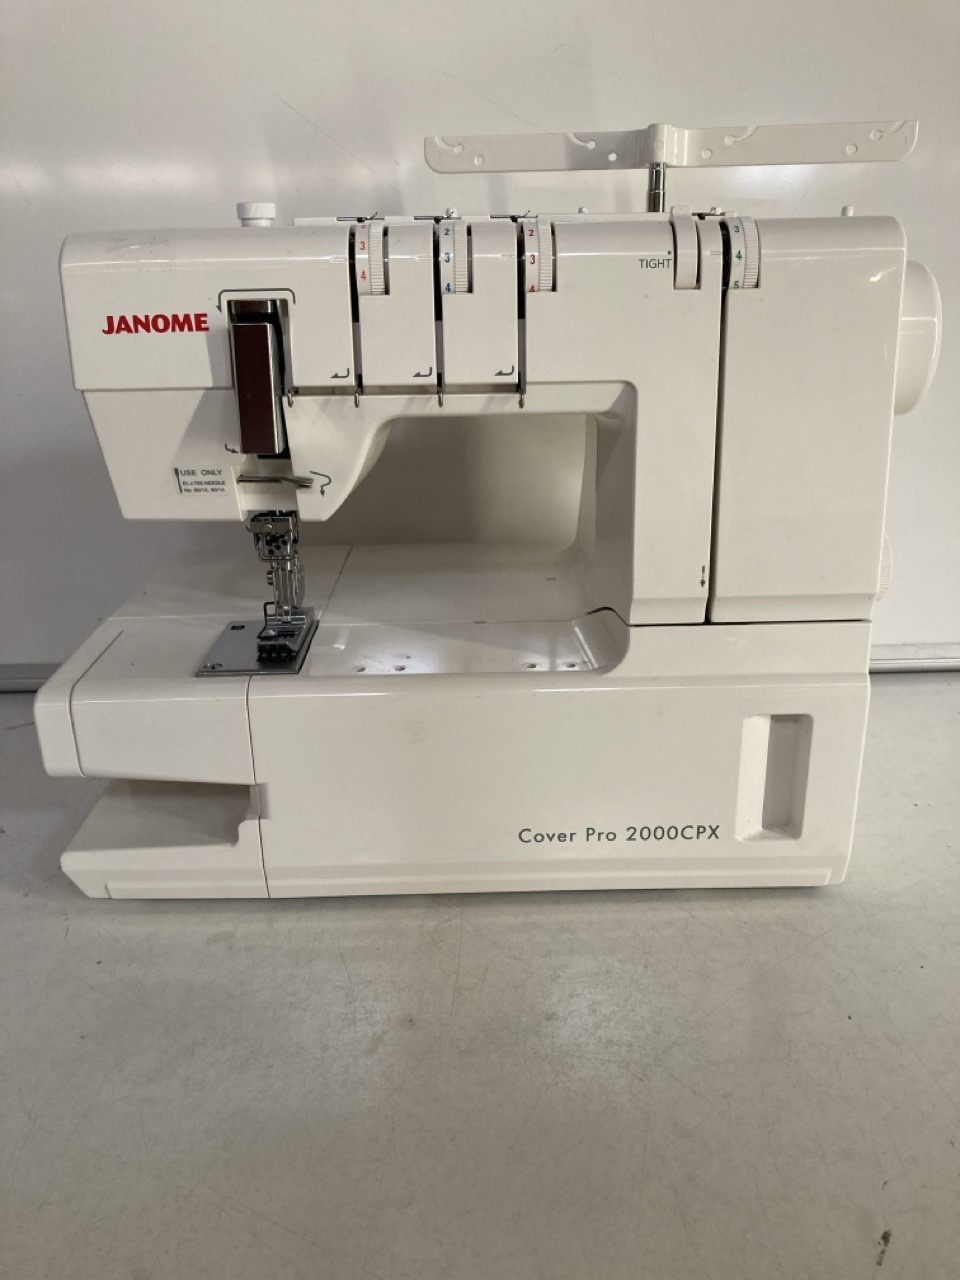 1 X JANOME COVER PRO 2000CPX SEWING MACHINE